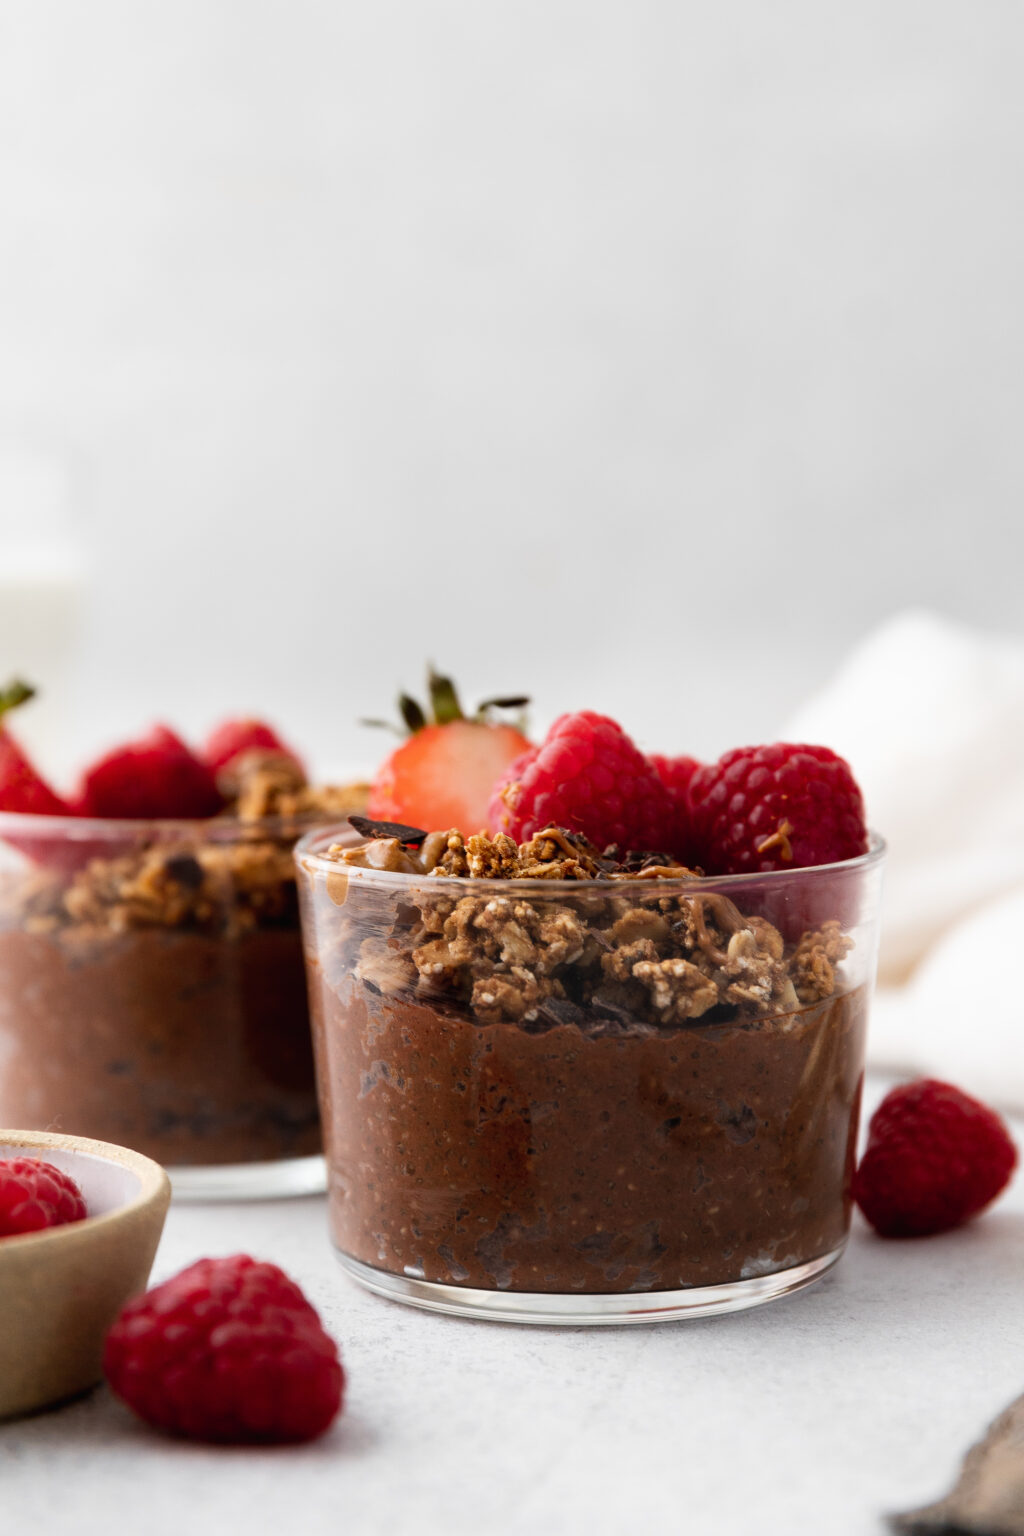 Chocolate Almond Butter Chia Pudding - All the Healthy Things